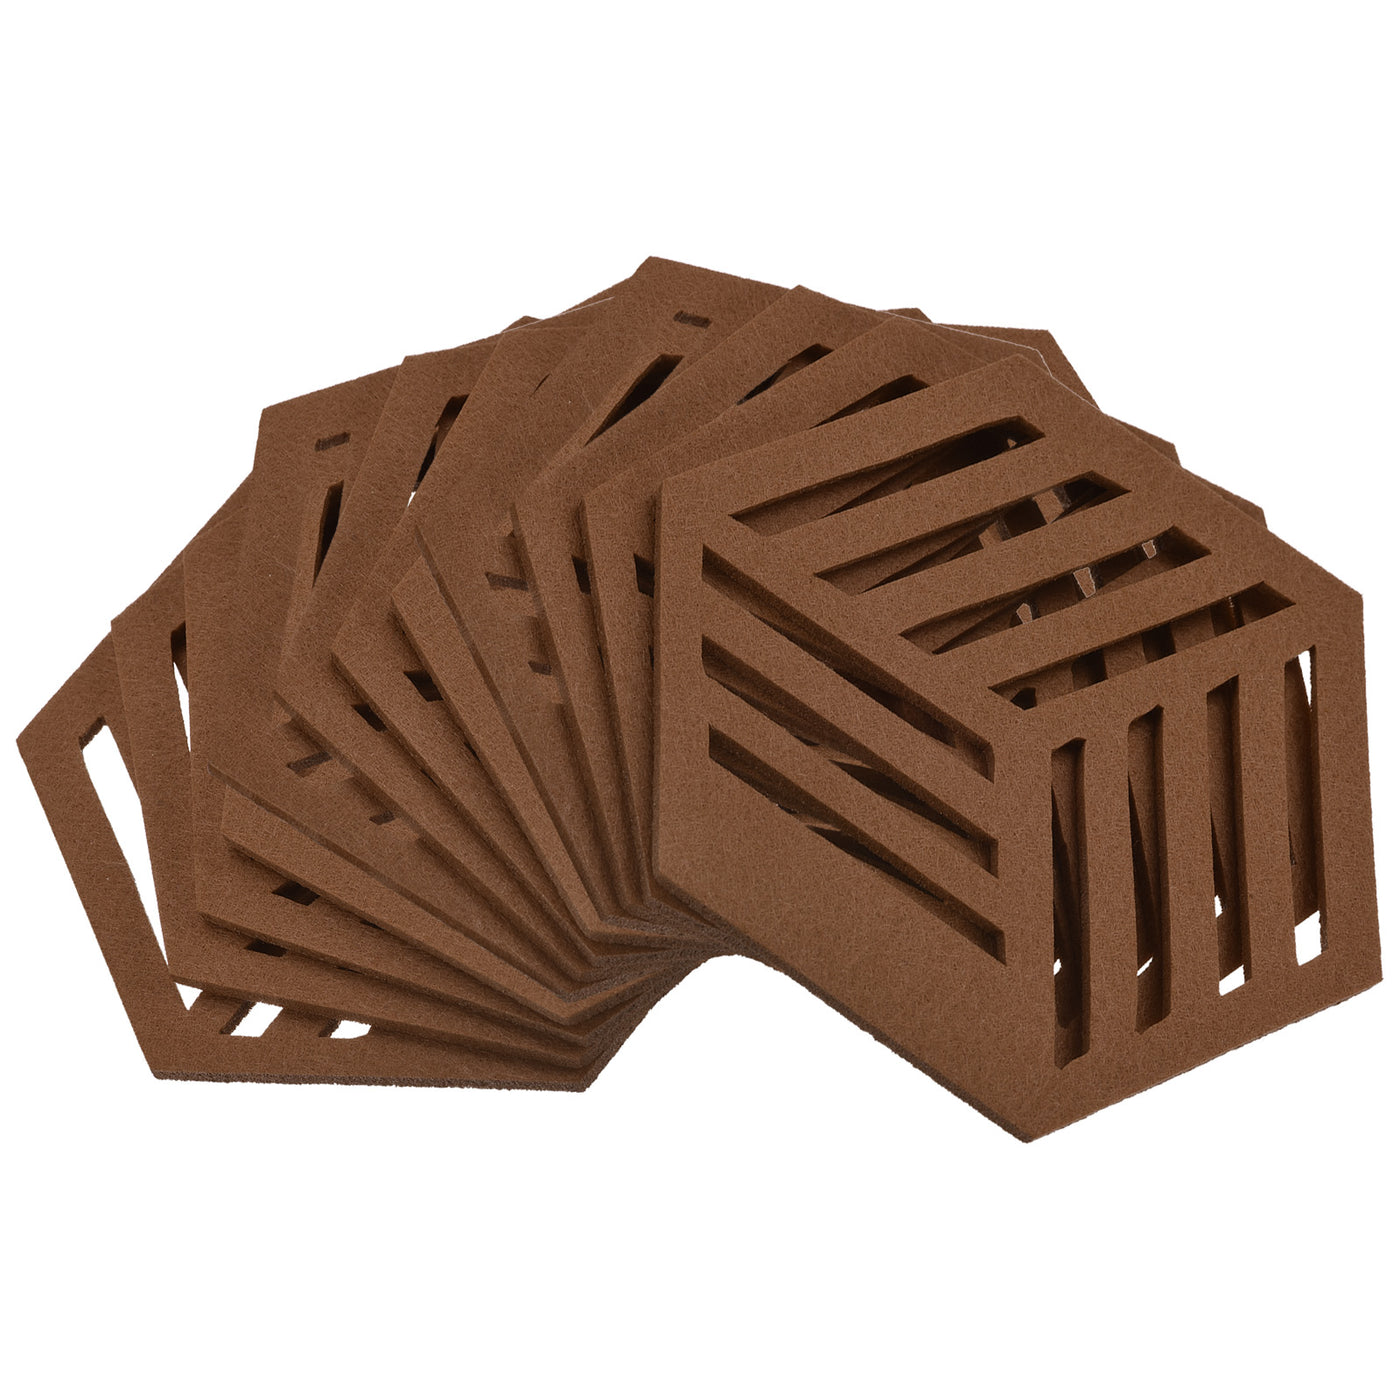 uxcell Uxcell Felt Coasters, 12pcs Hexagon Mat Pad Coaster for Drink Cup Pot Bowl Vase, Brown